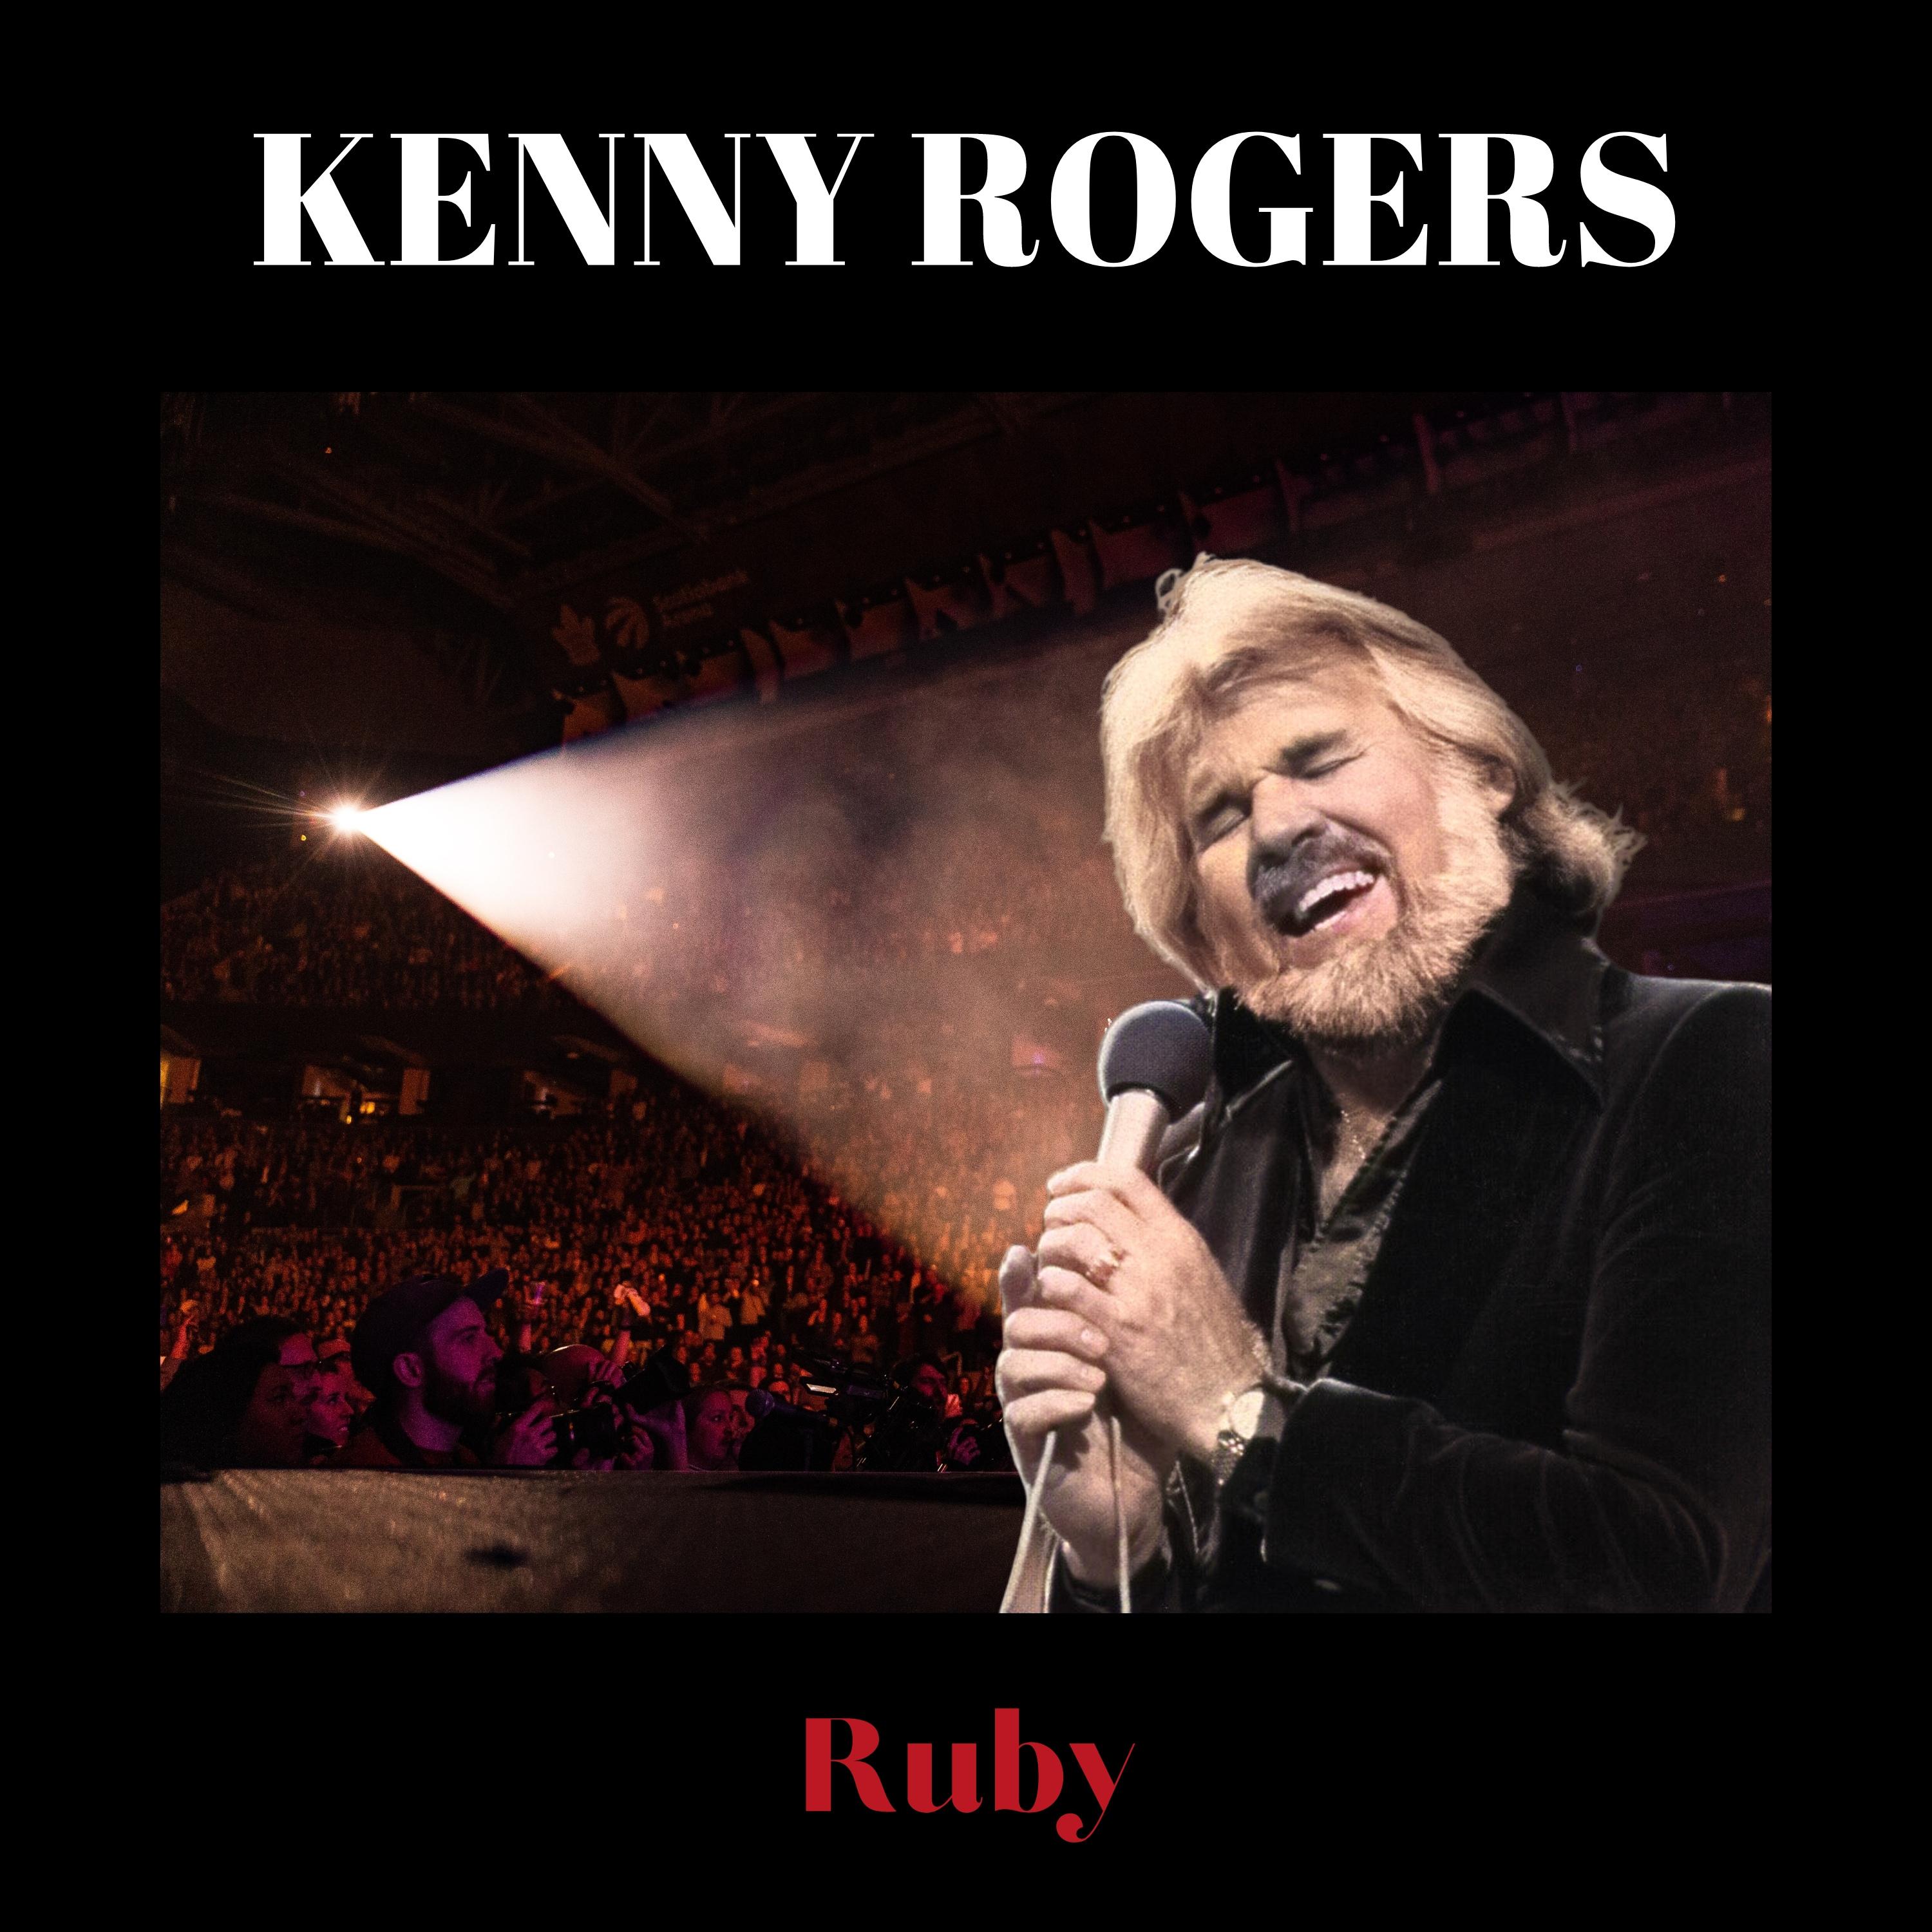 Kenny Rogers - It's Raining in My Mind